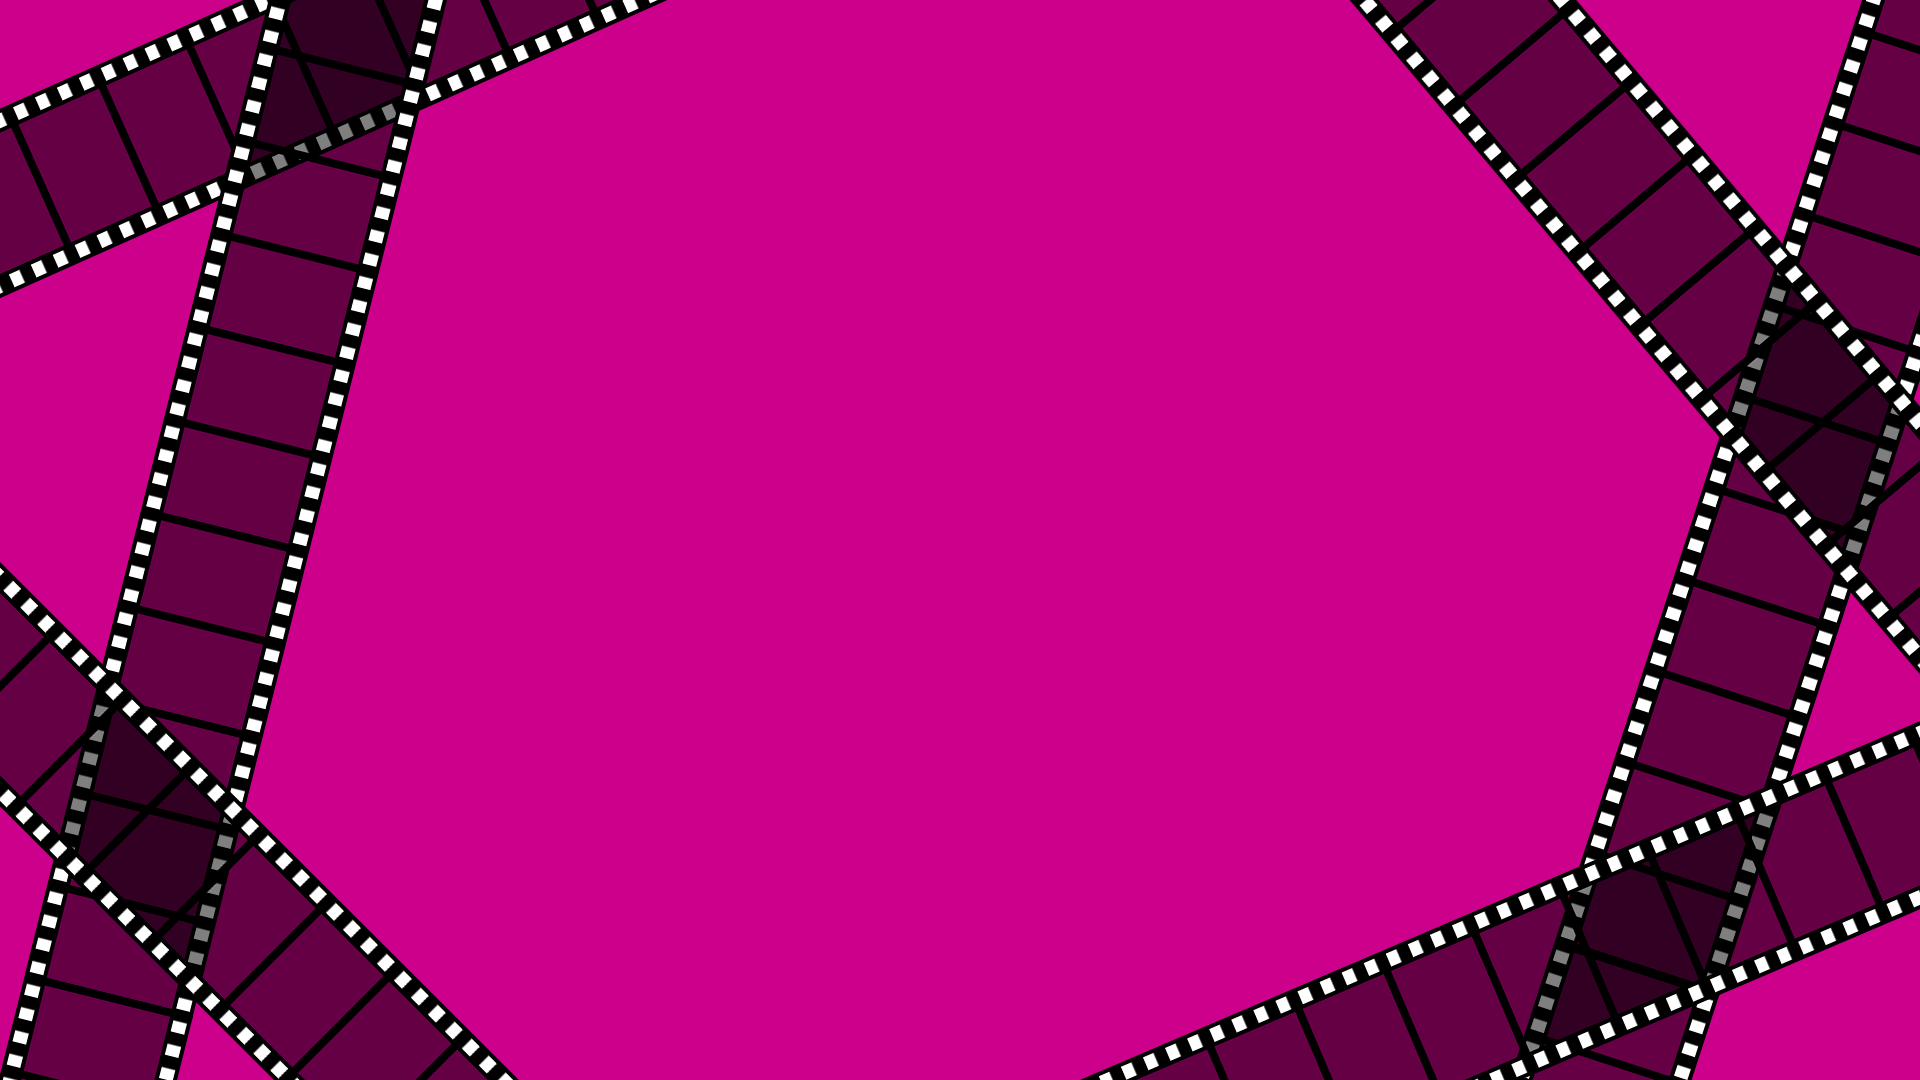 Pink Backgrounds Wallpapers